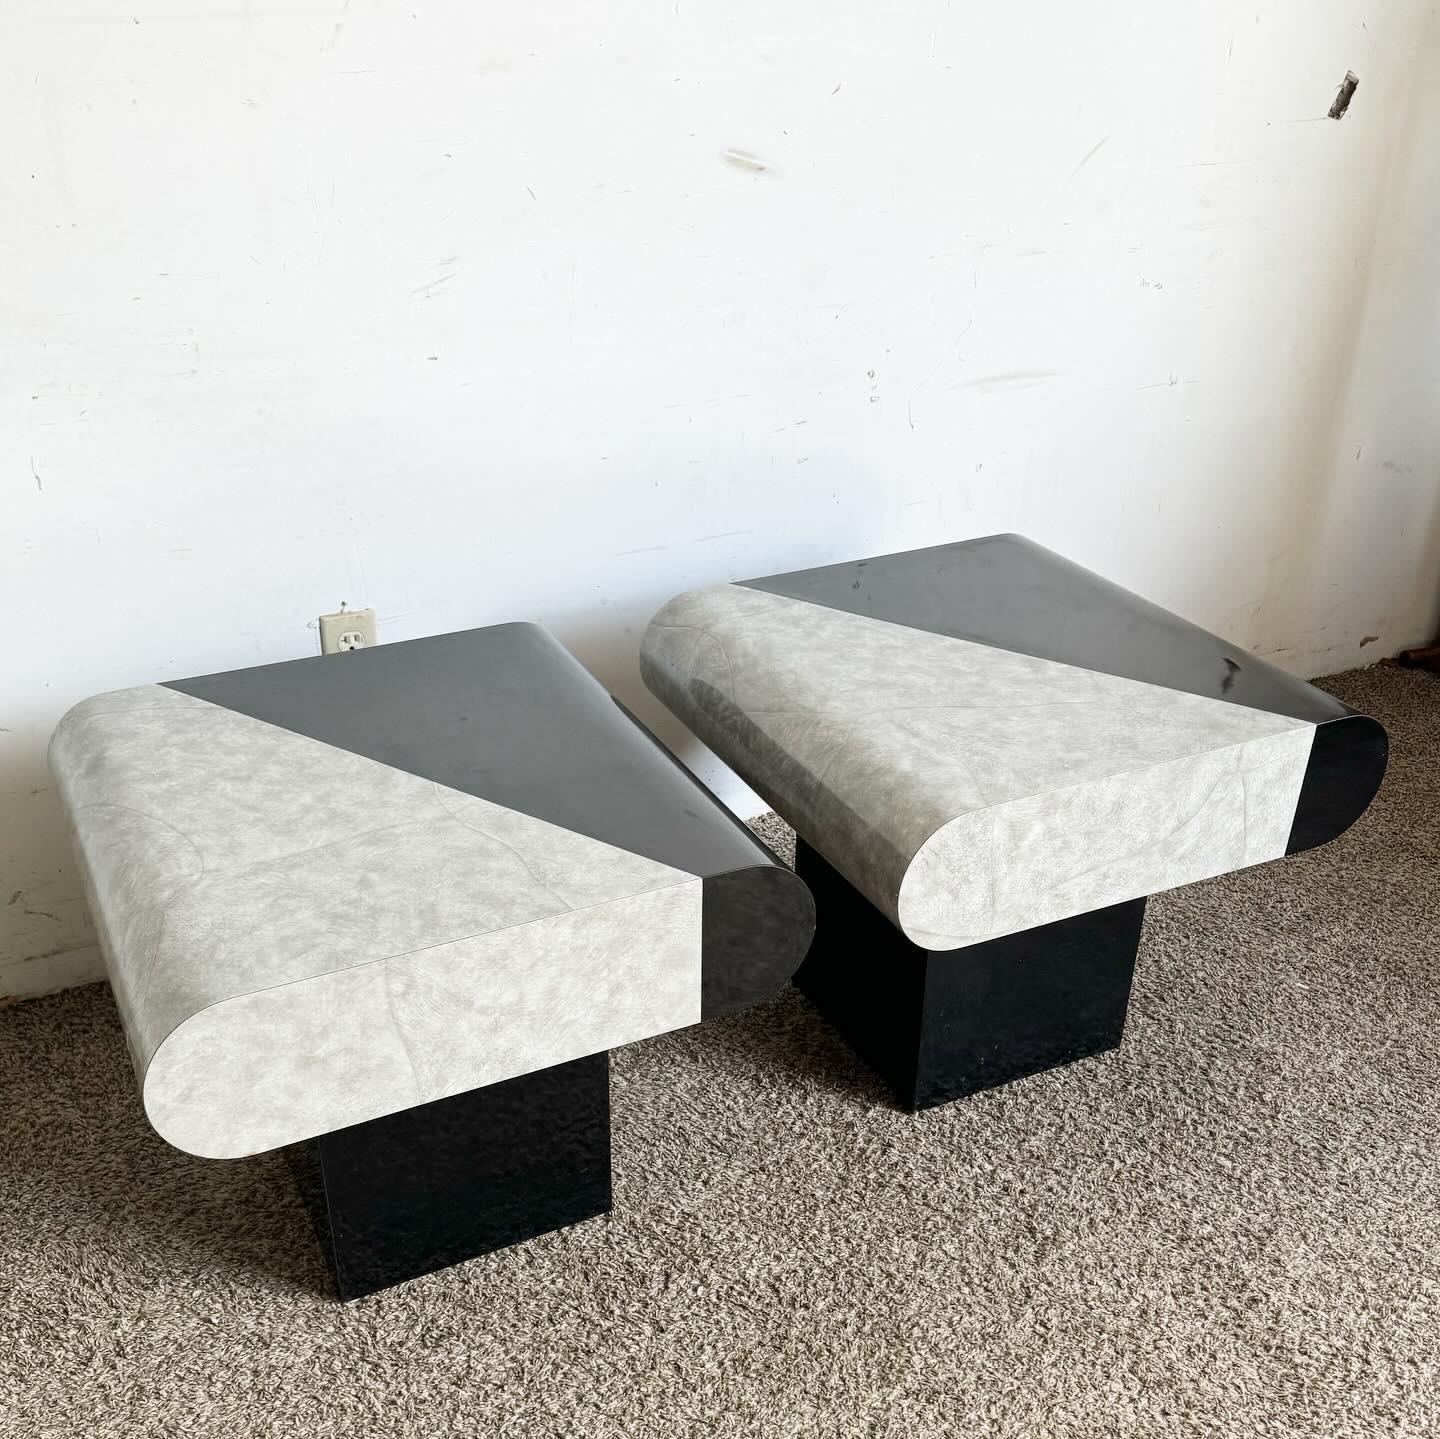 American Postmodern Black Gloss and Faux Stone Laminate Bullnose Side Tables - a Pair For Sale